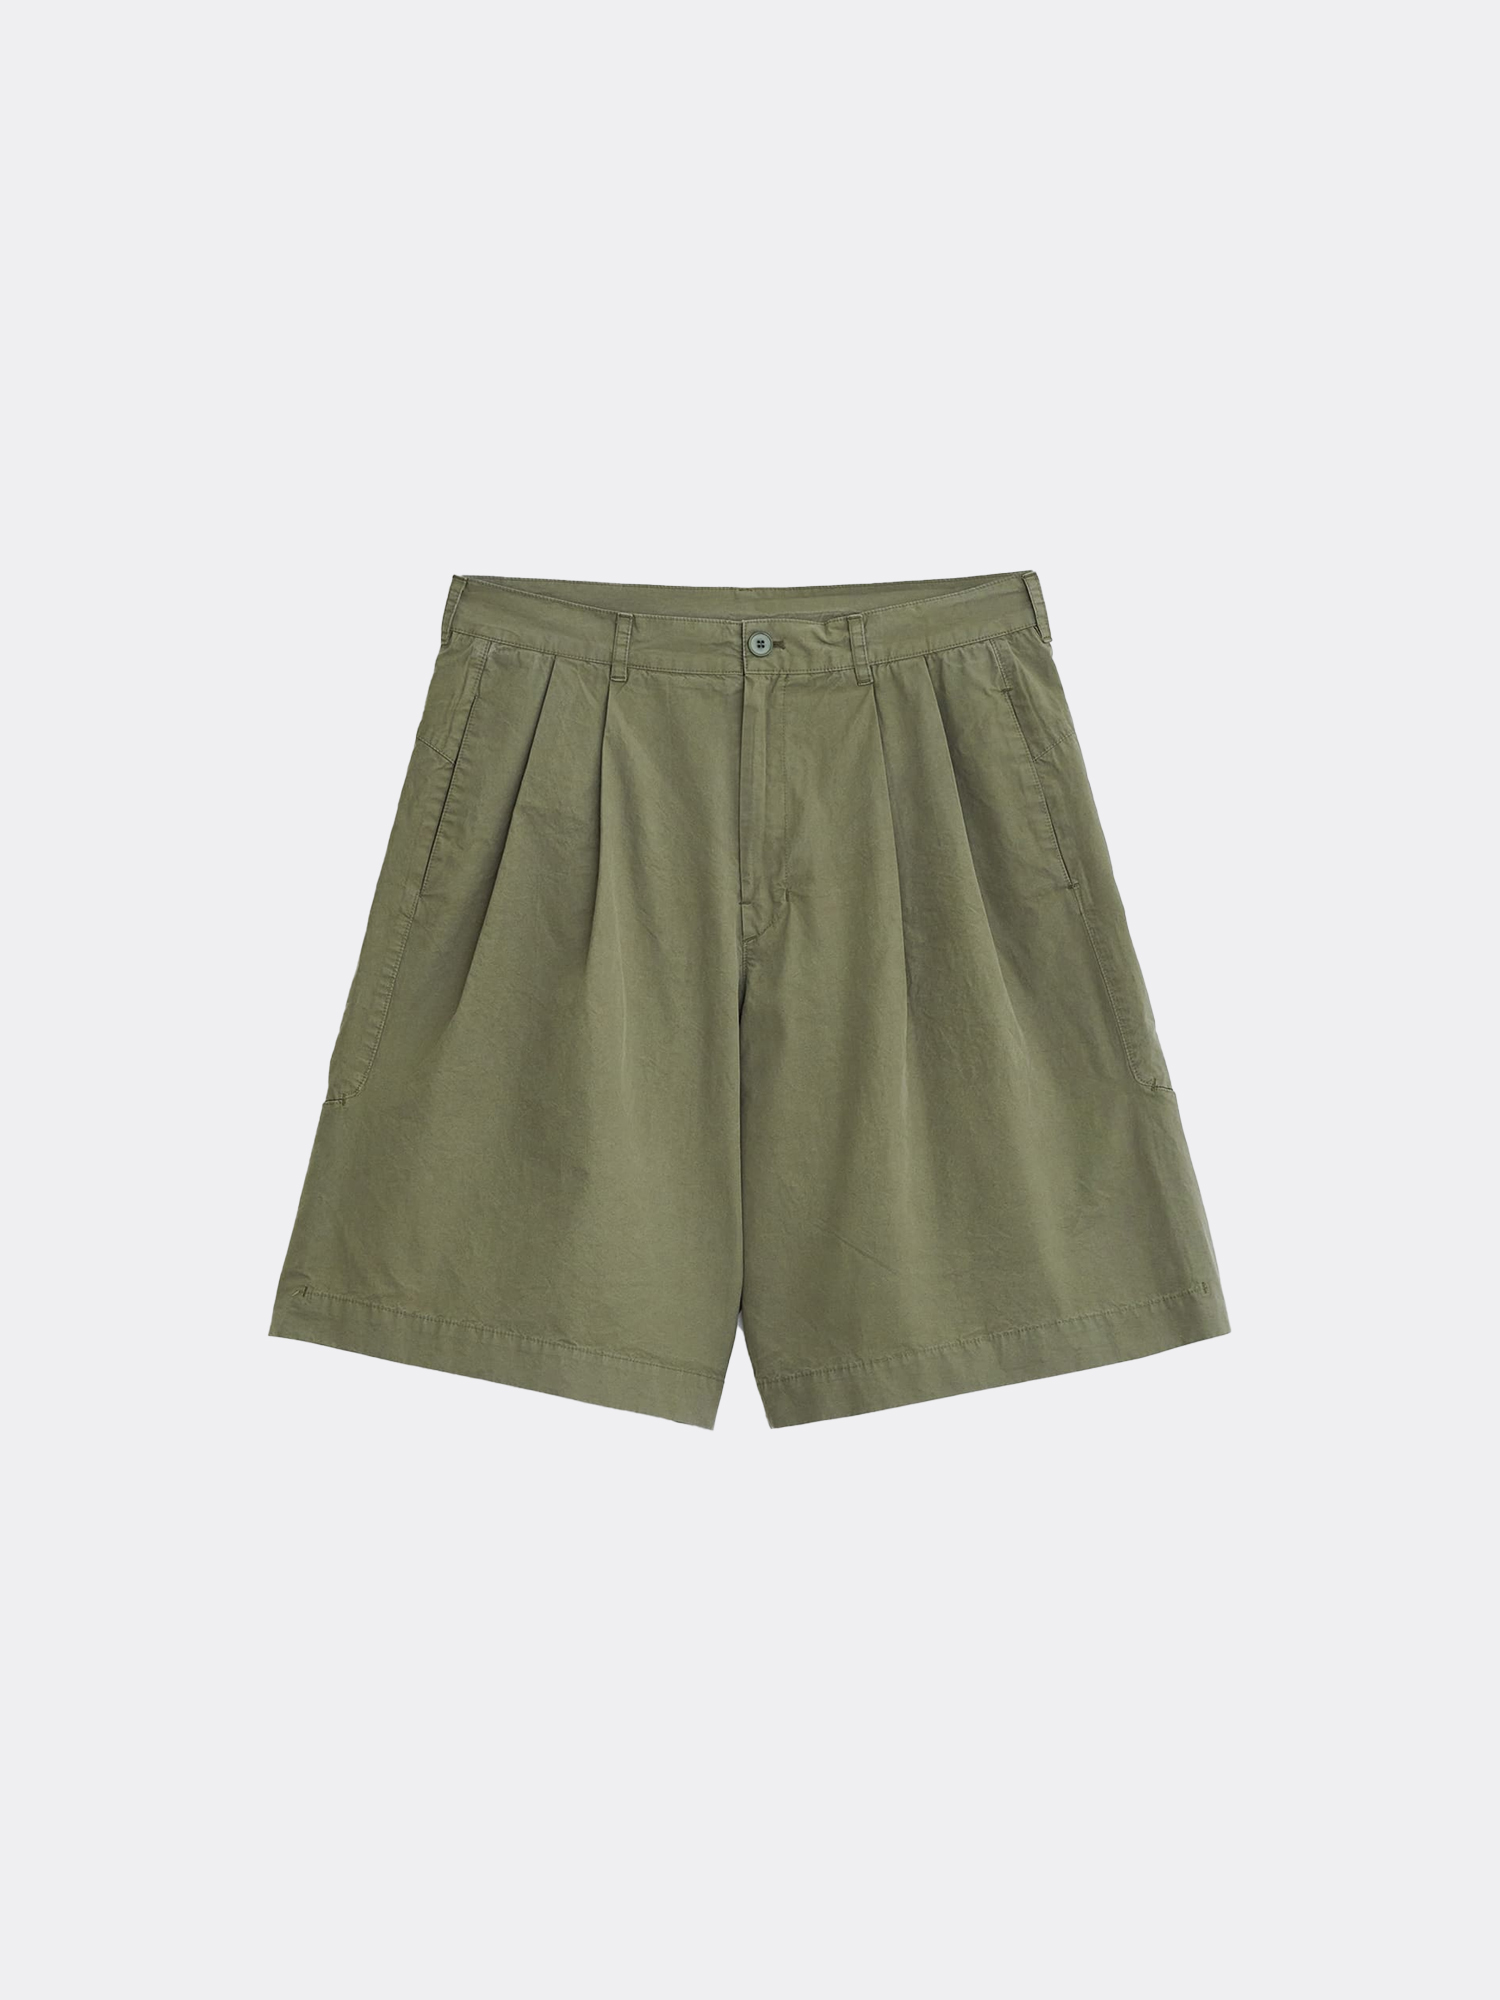 EE GARMENTS DYED COTTON CARGO HALF PANTS-OLIVE